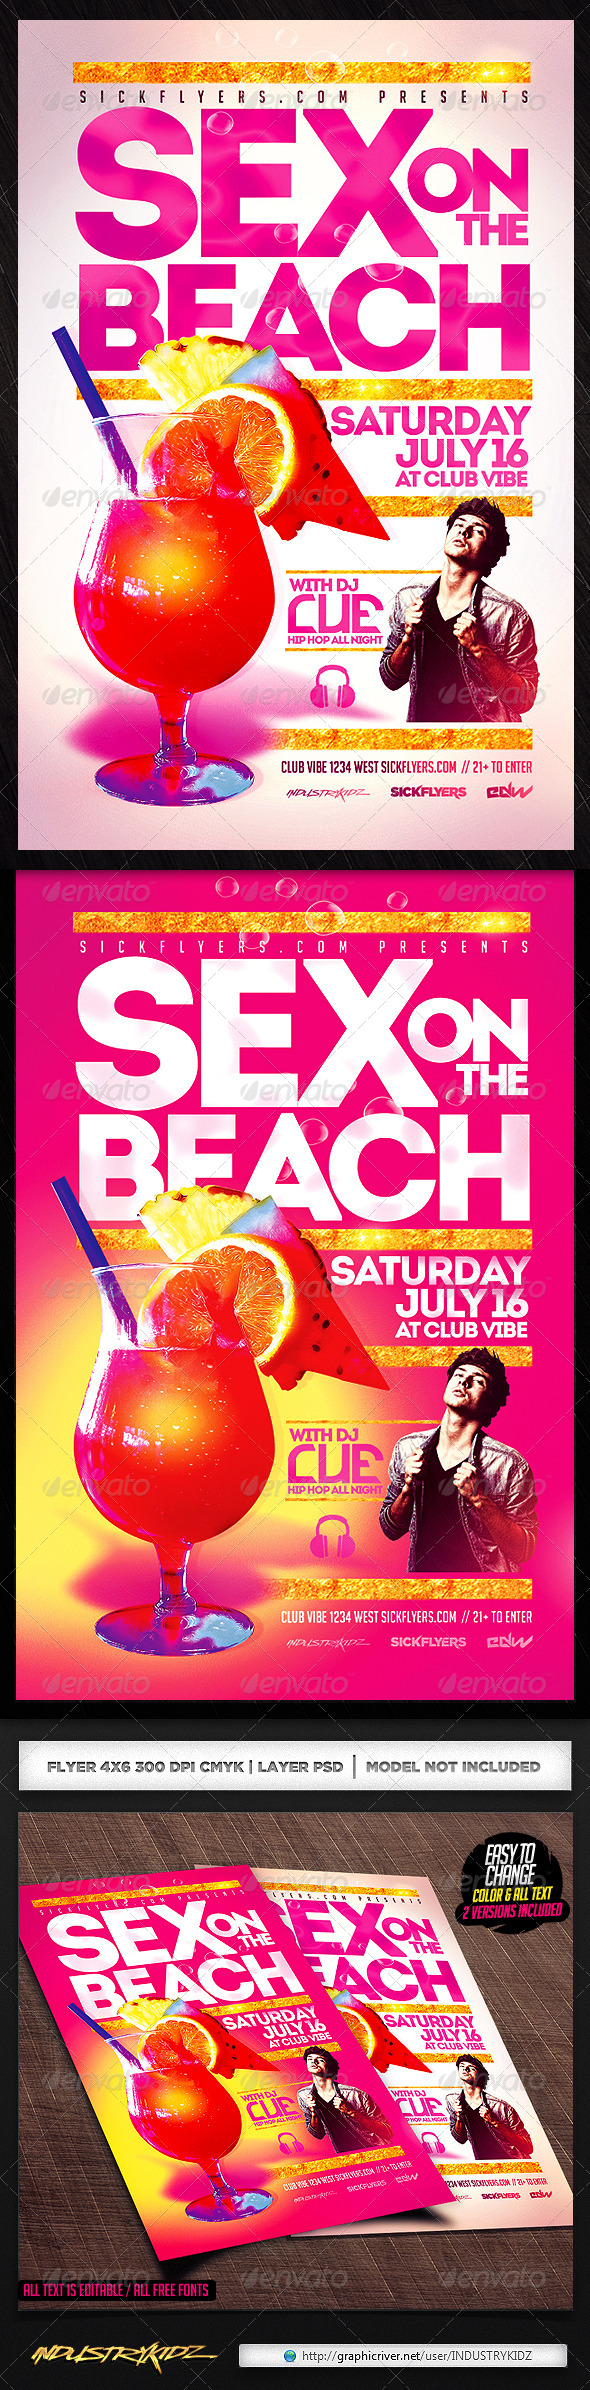 Sex On The Beach Flyer Template Psd Graphicriver 